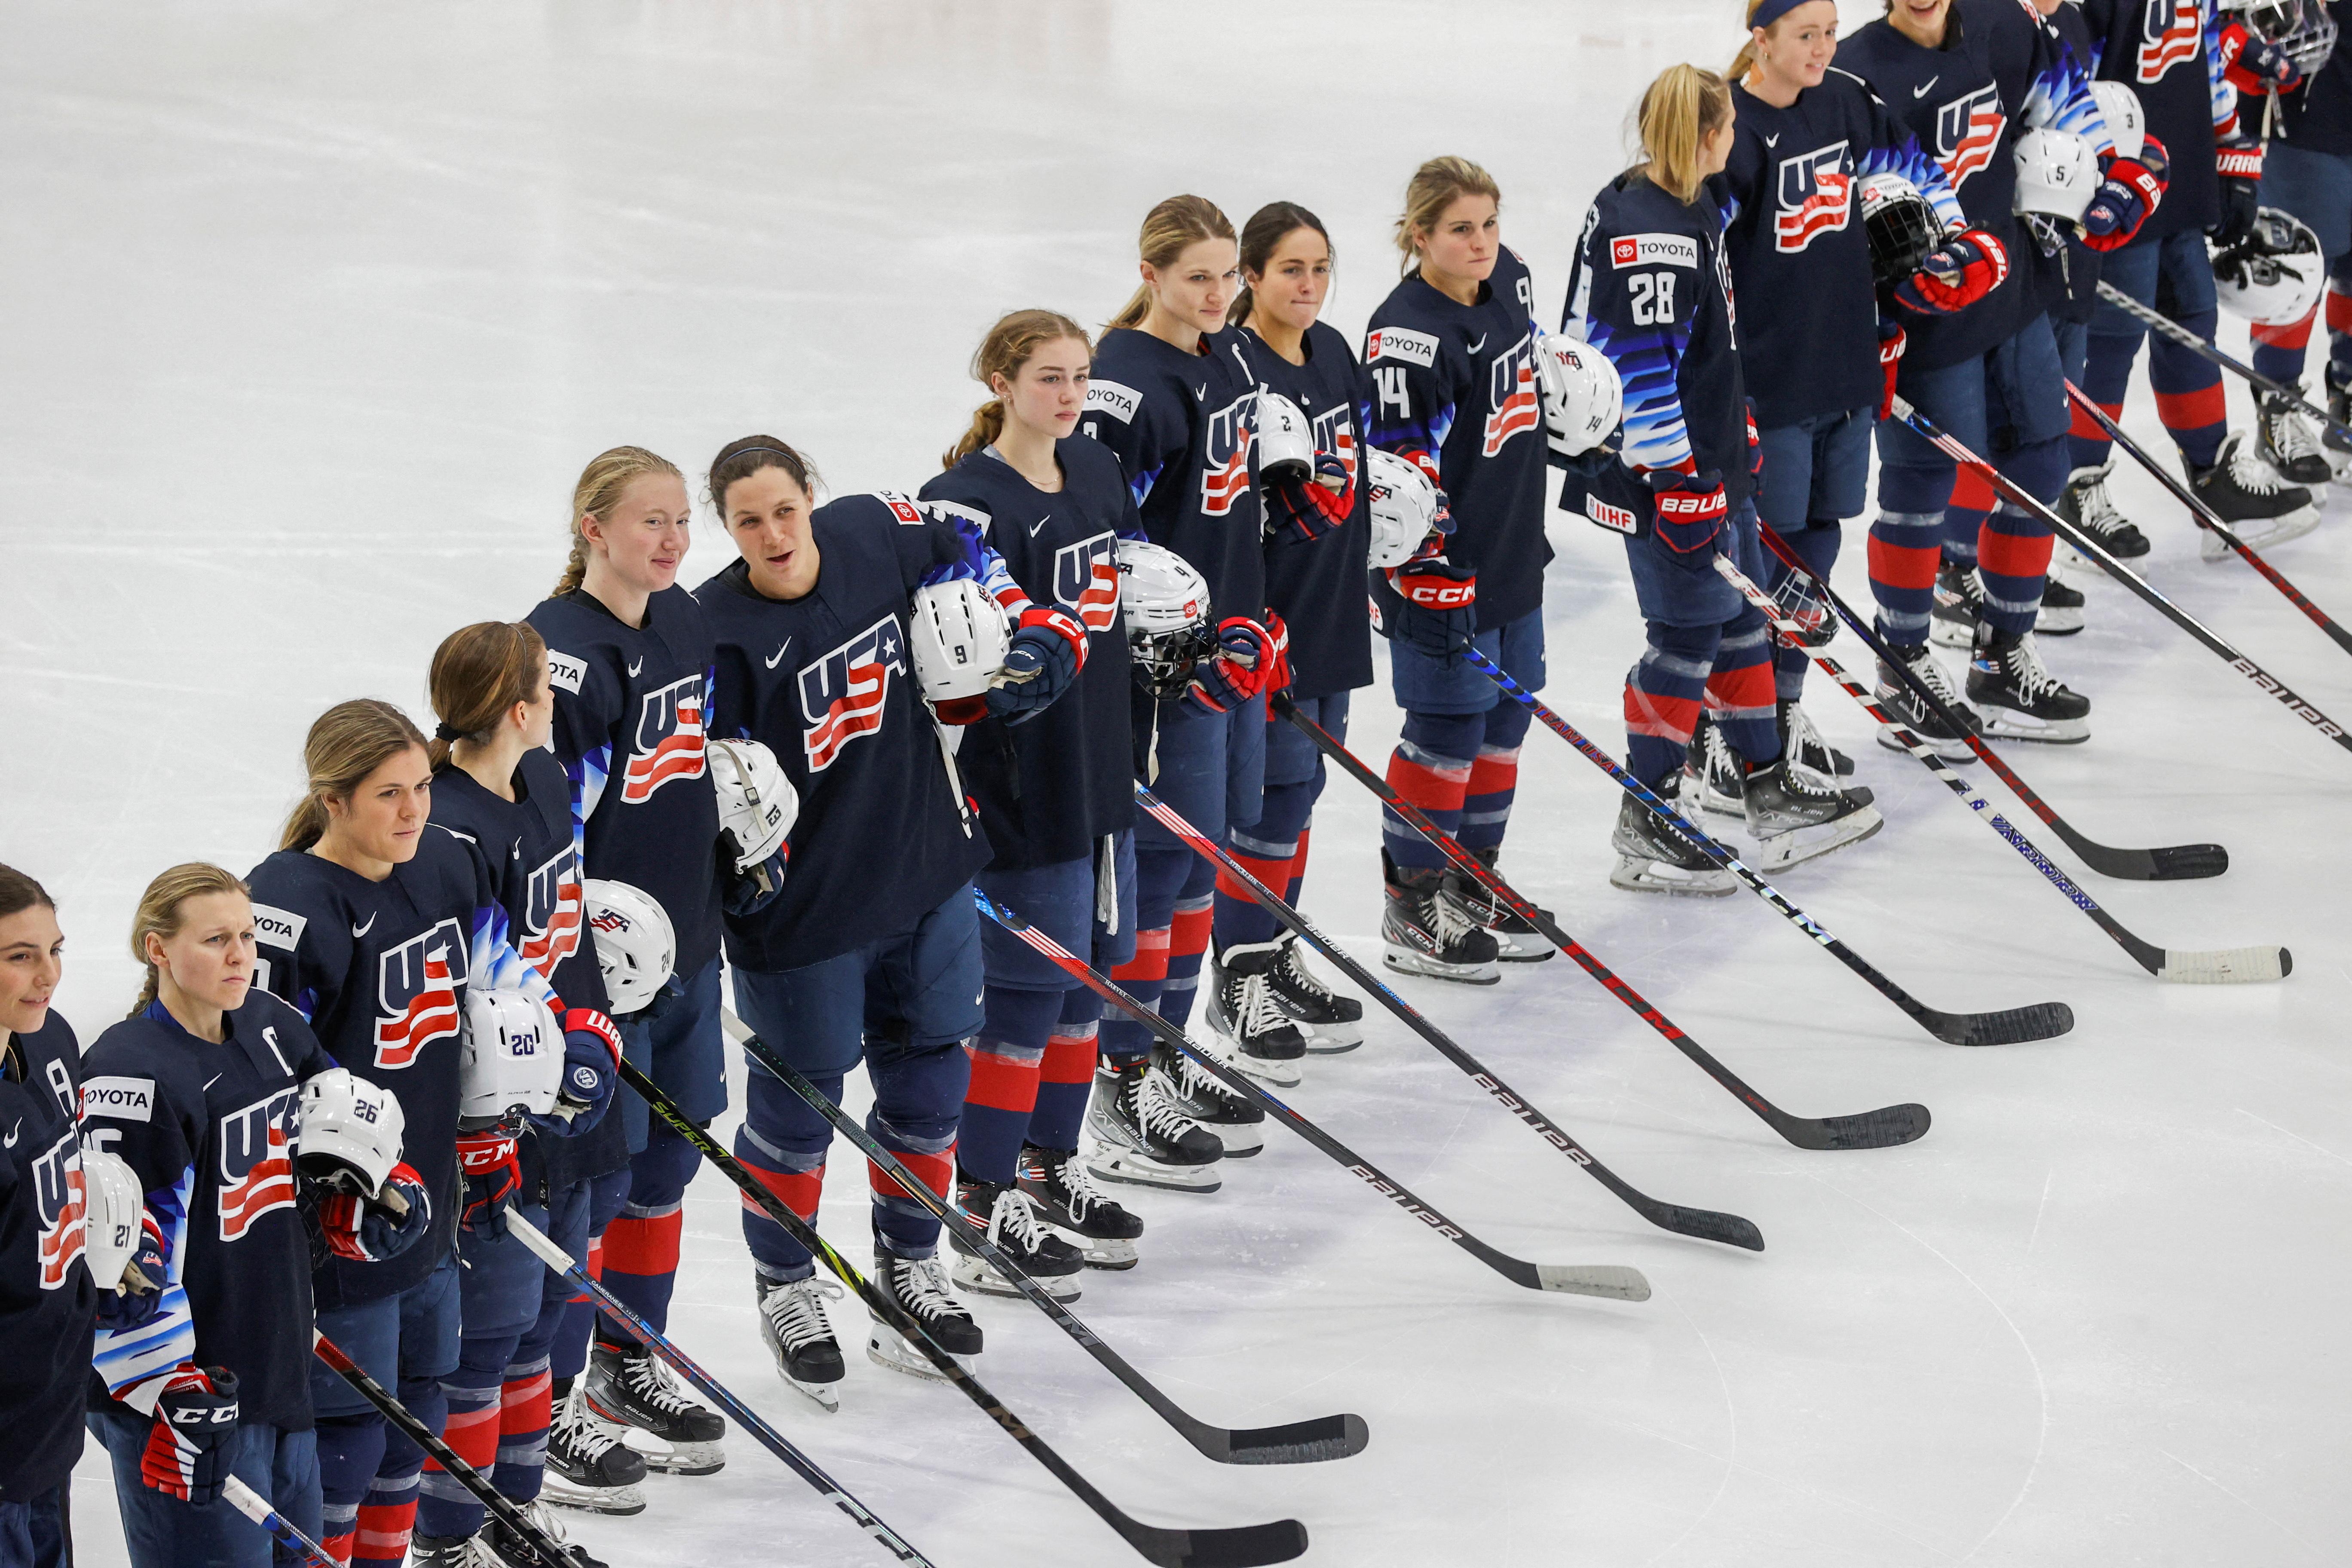 Canada and U.S. women’s hockey national teams play an international hockey exhibition game in Maryland Heights, Missouri